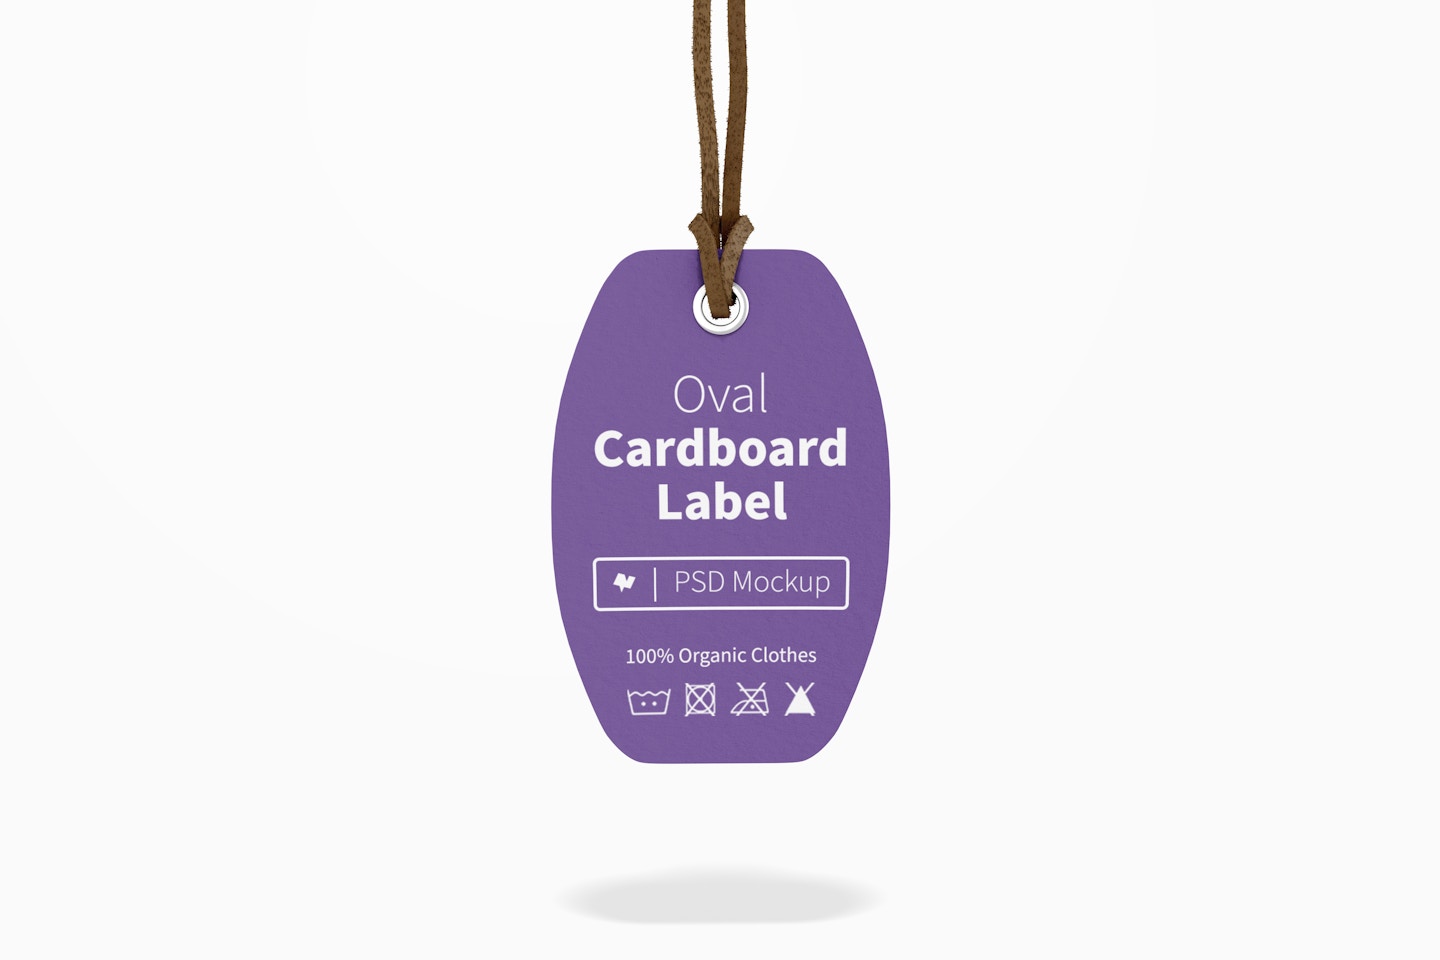 Oval Cardboard Label with Leather Rope Mockup